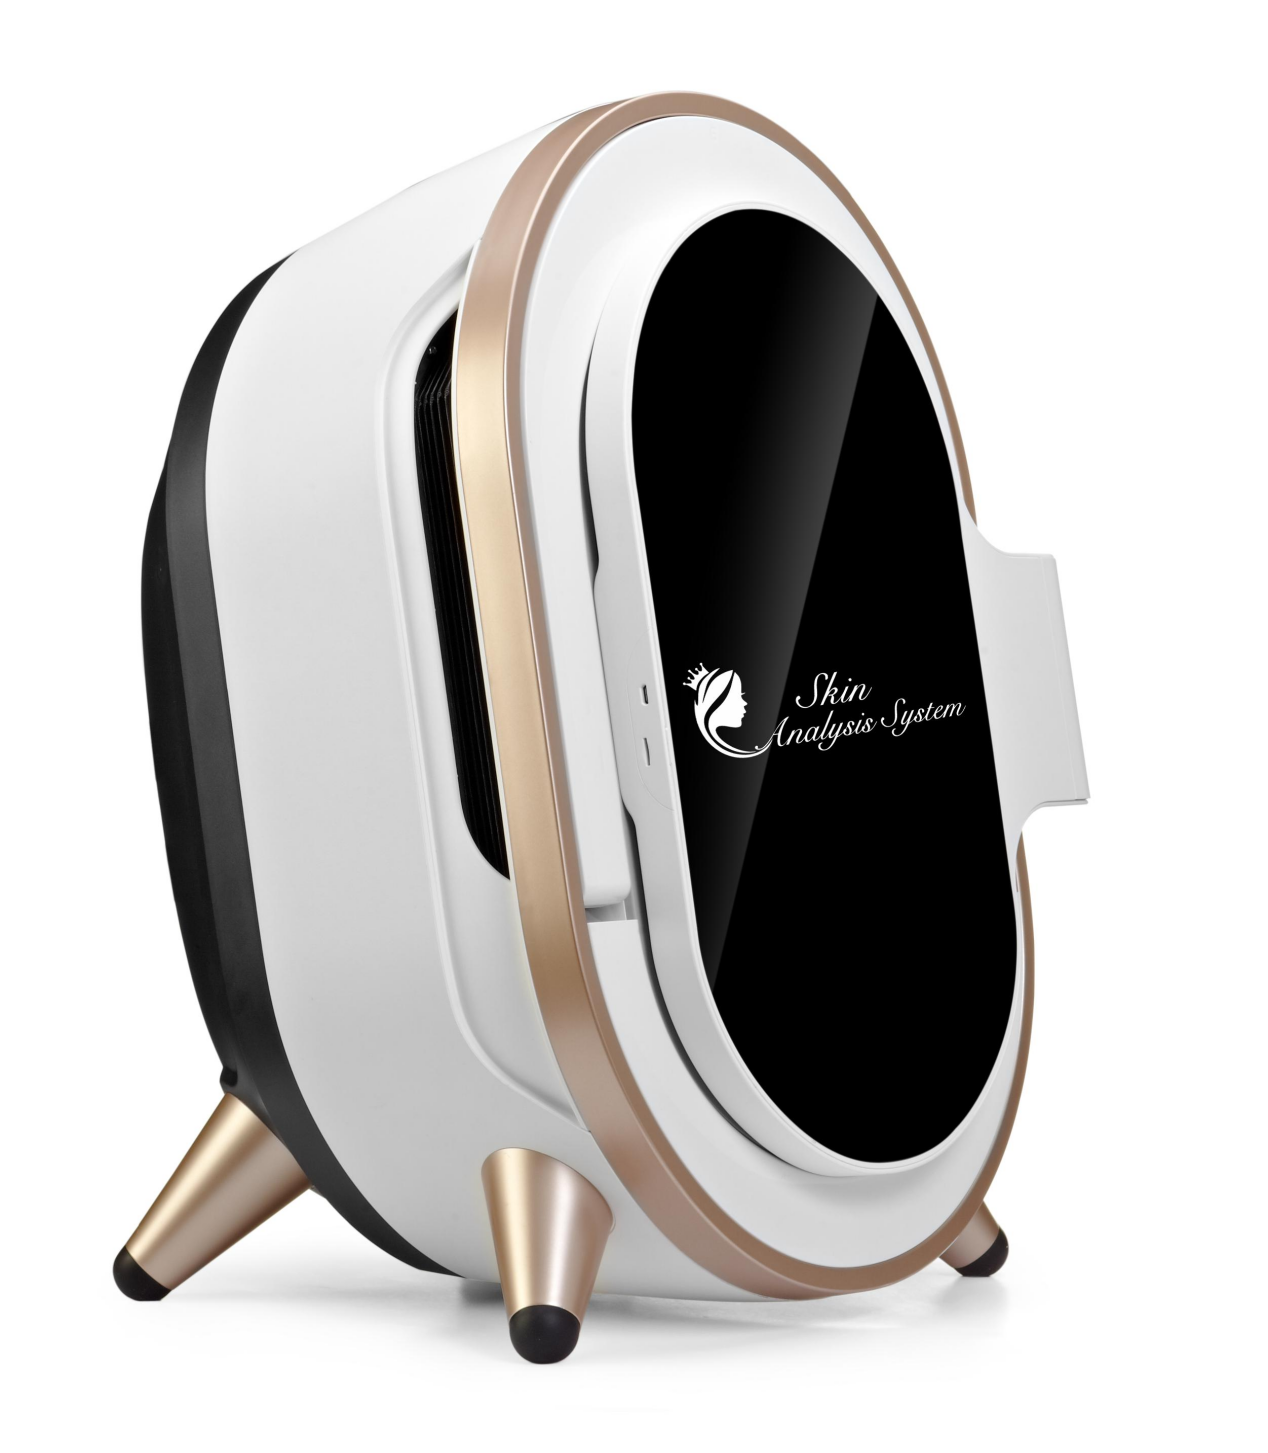 Topsinoheren newest product –  the world’s most advanced skin detection equipment